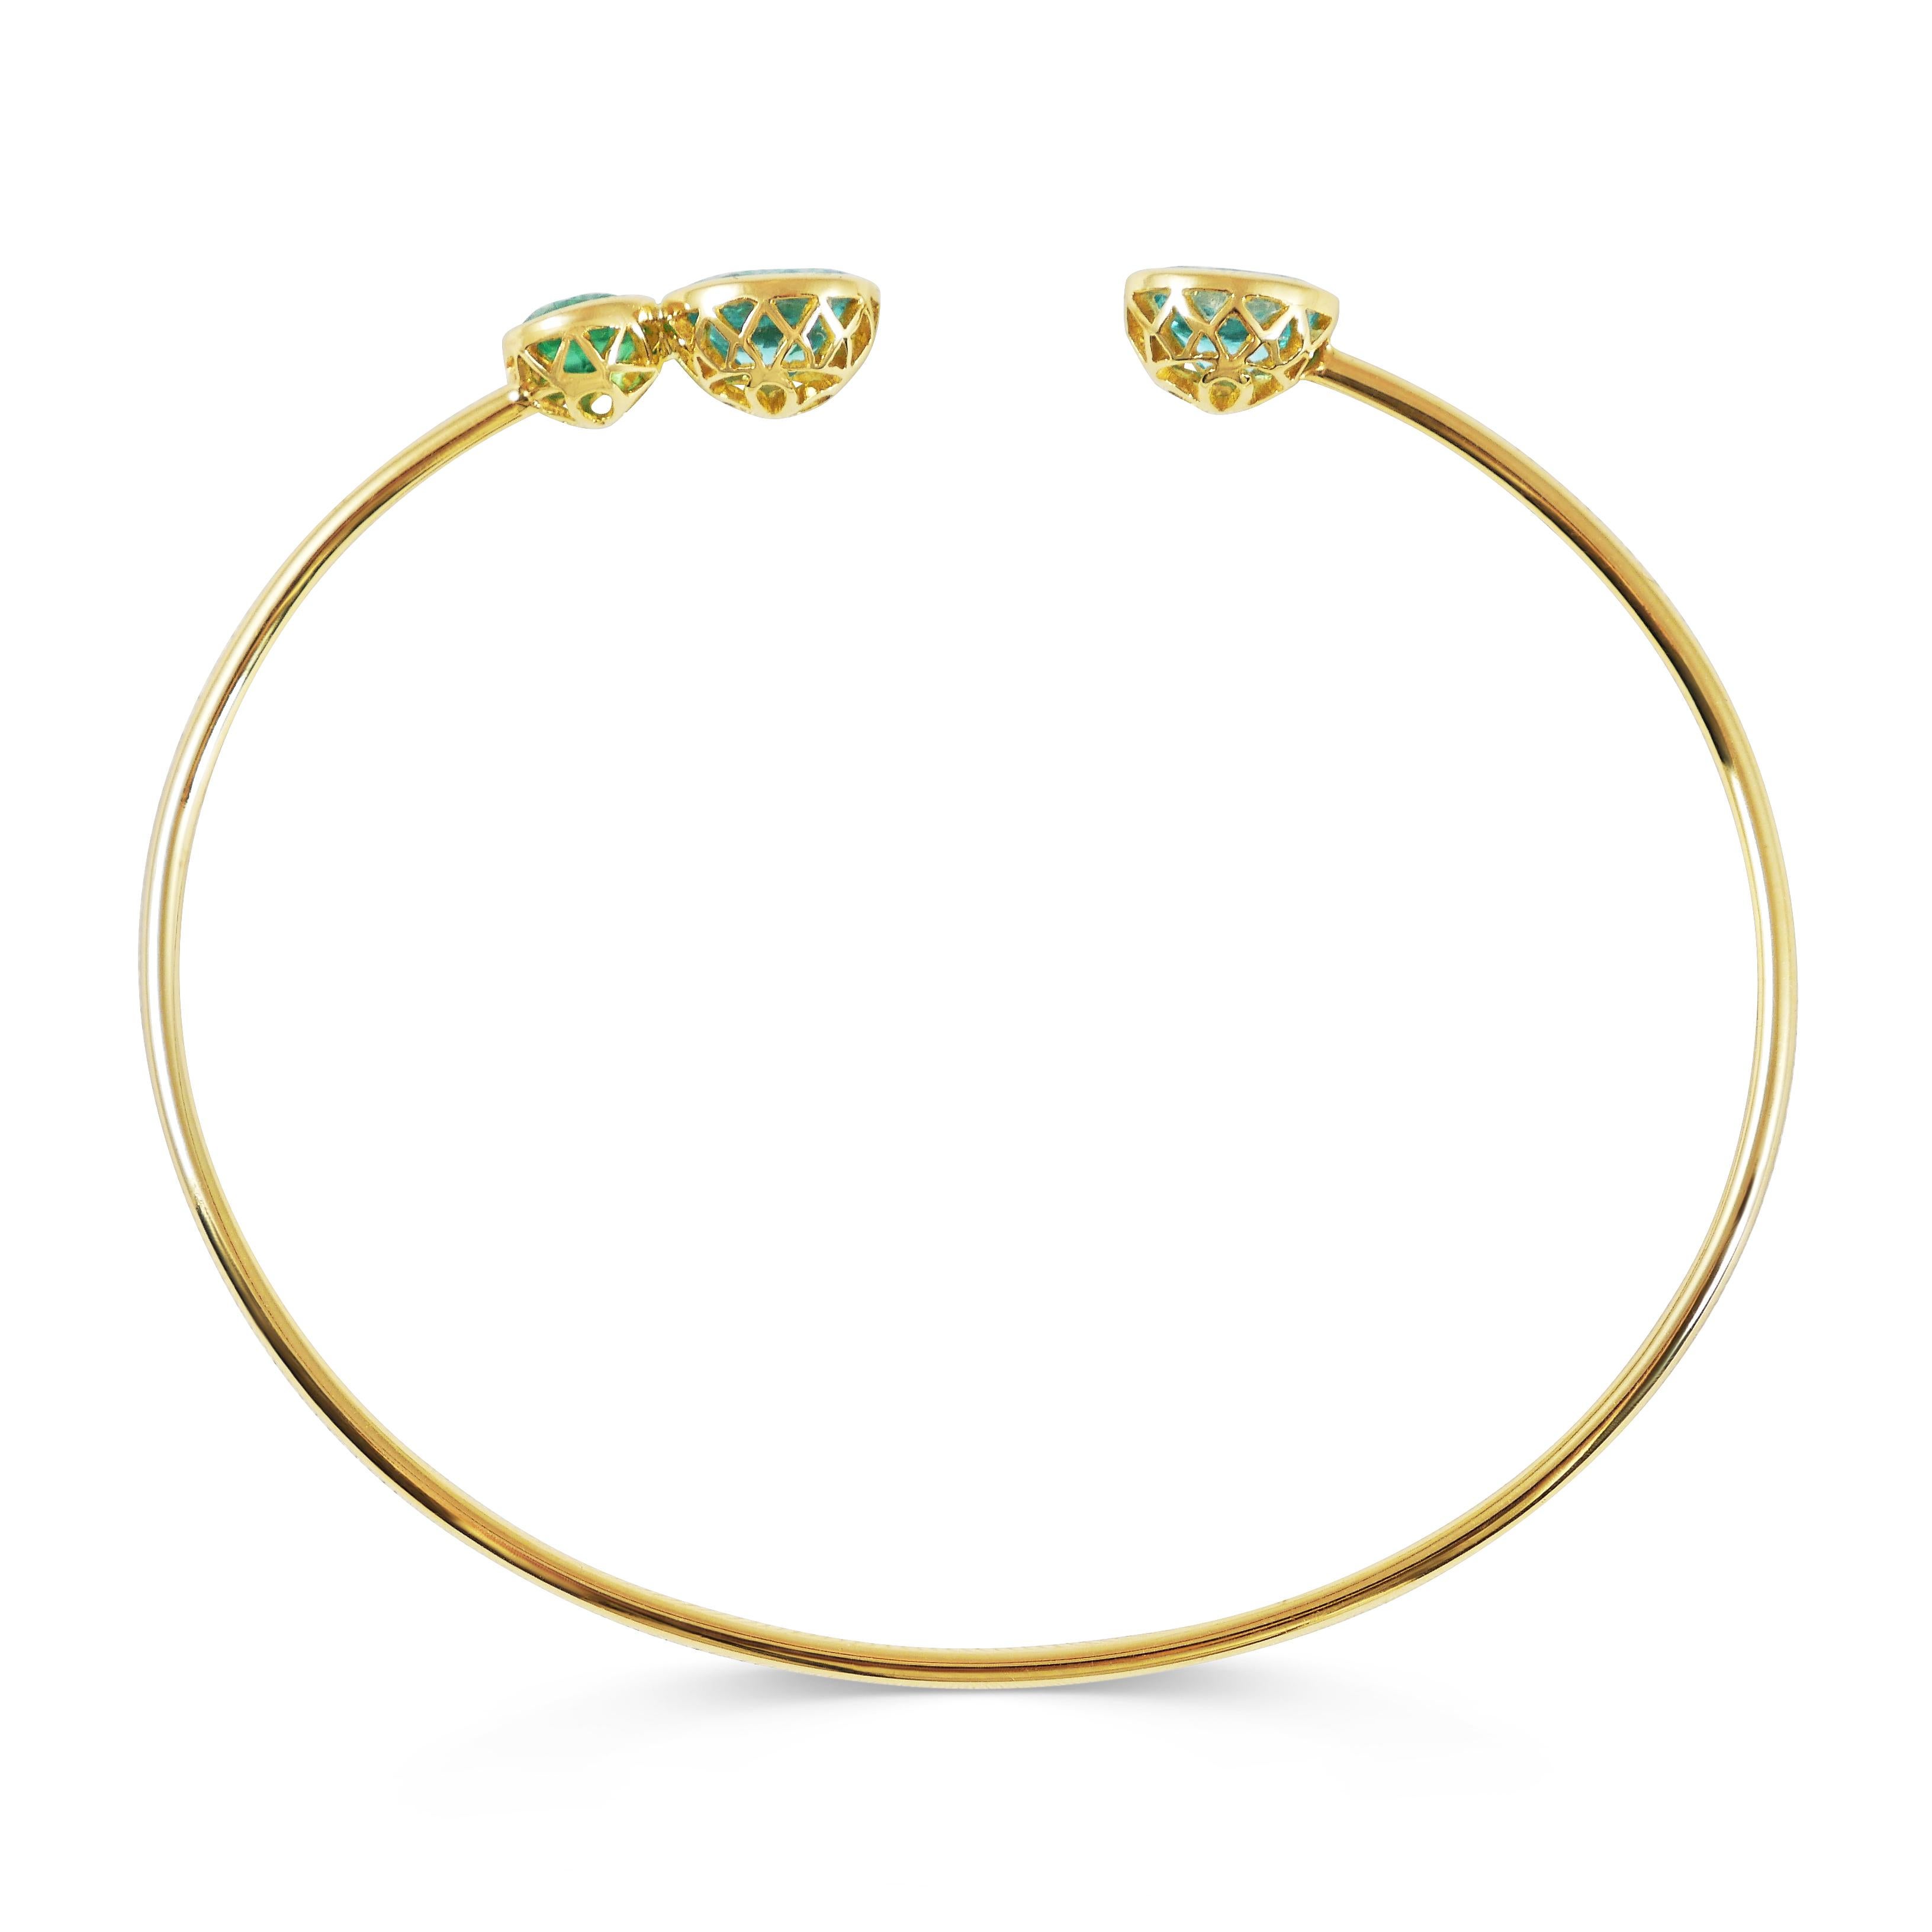 Handcrafted 2.00 & 0.55 Carat Apatites & Emerald 18k Yellow Gold Open Bangle Bracelet. Designed as birds singing next to one another this bracelet combines a colorful range of precious gems. Our signature hand pierced lace on the back of each gem